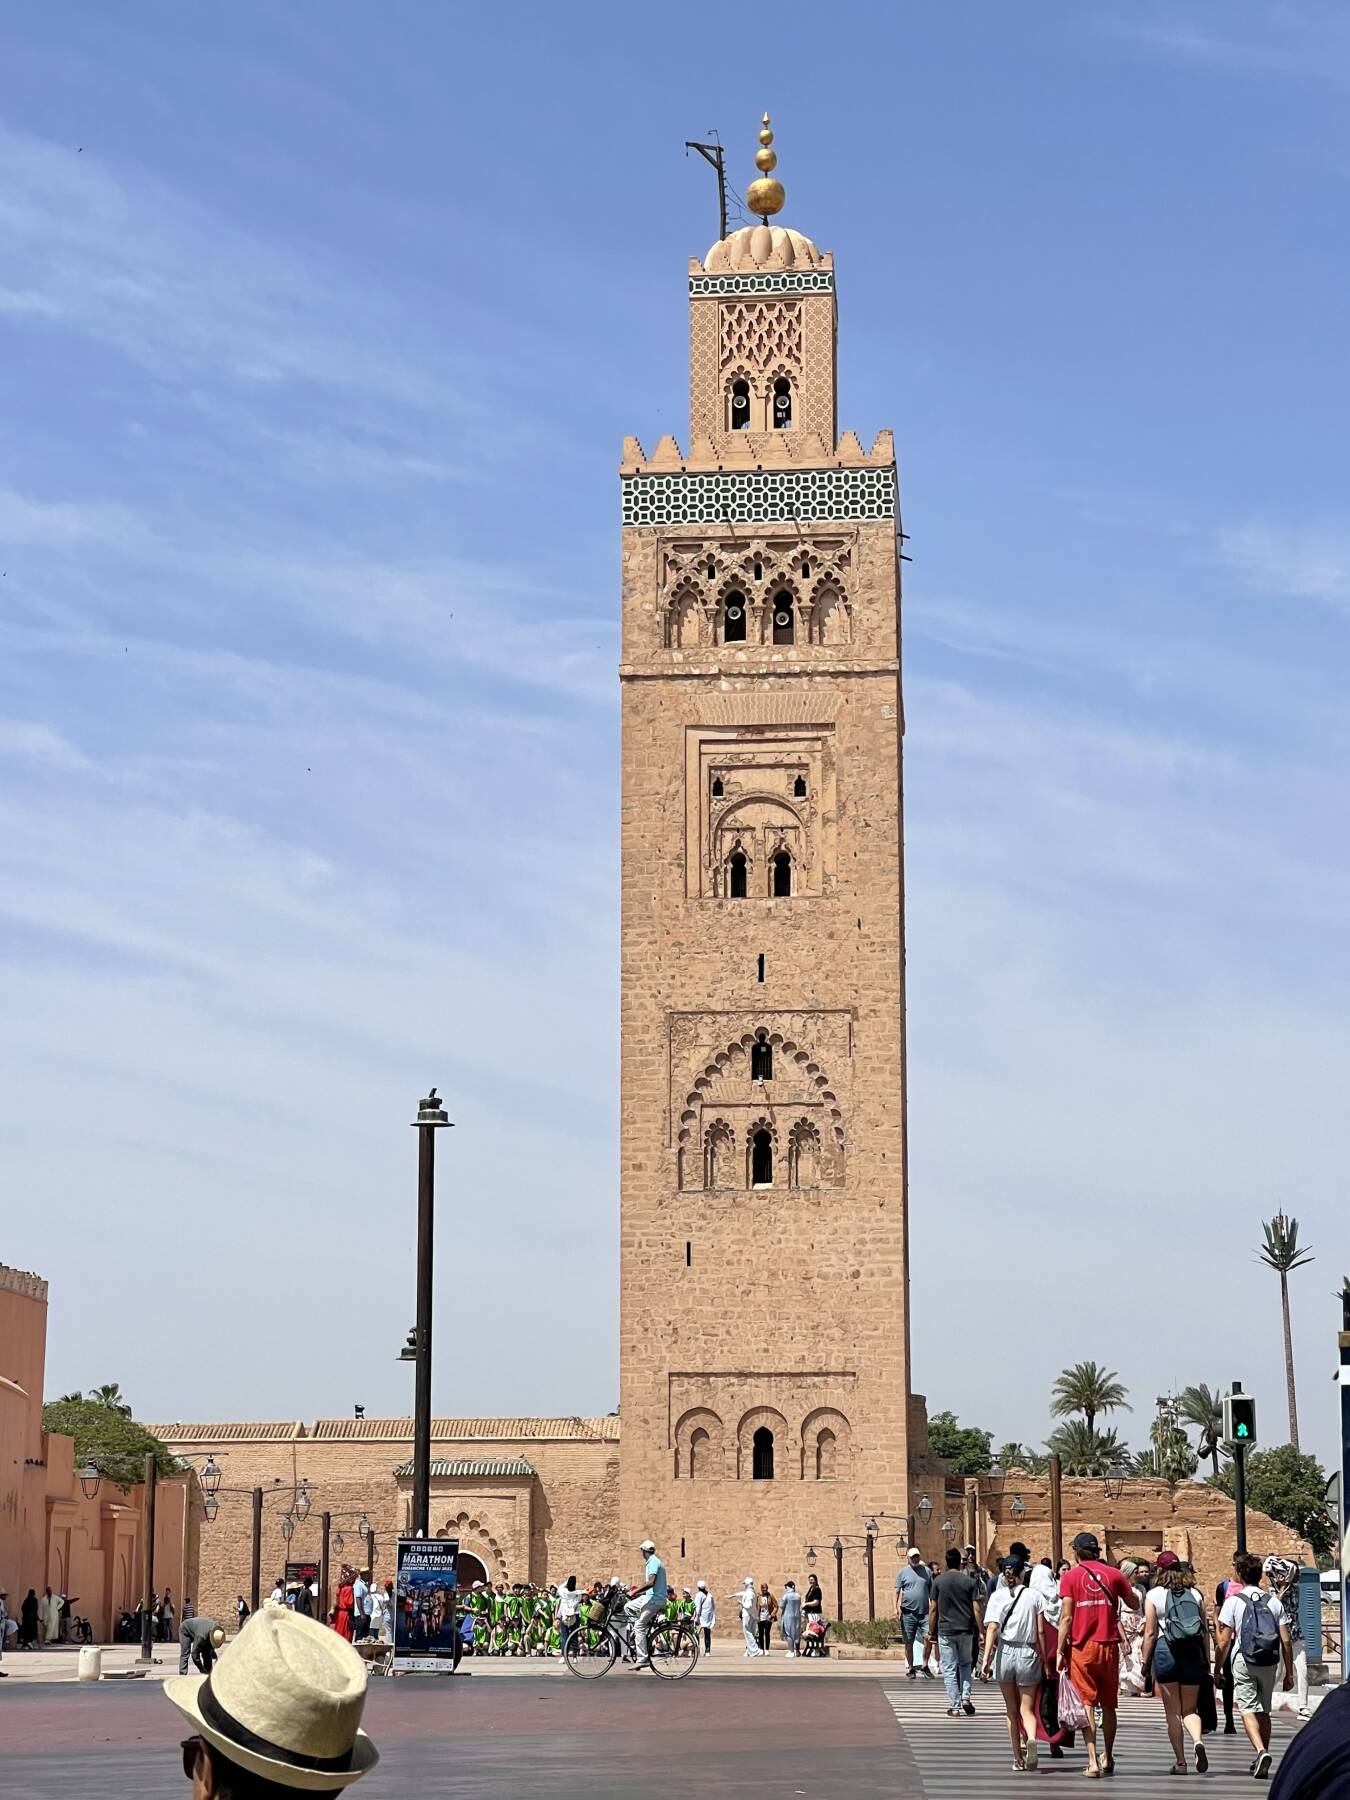 New Year's Eve in Morocco, a trip for women